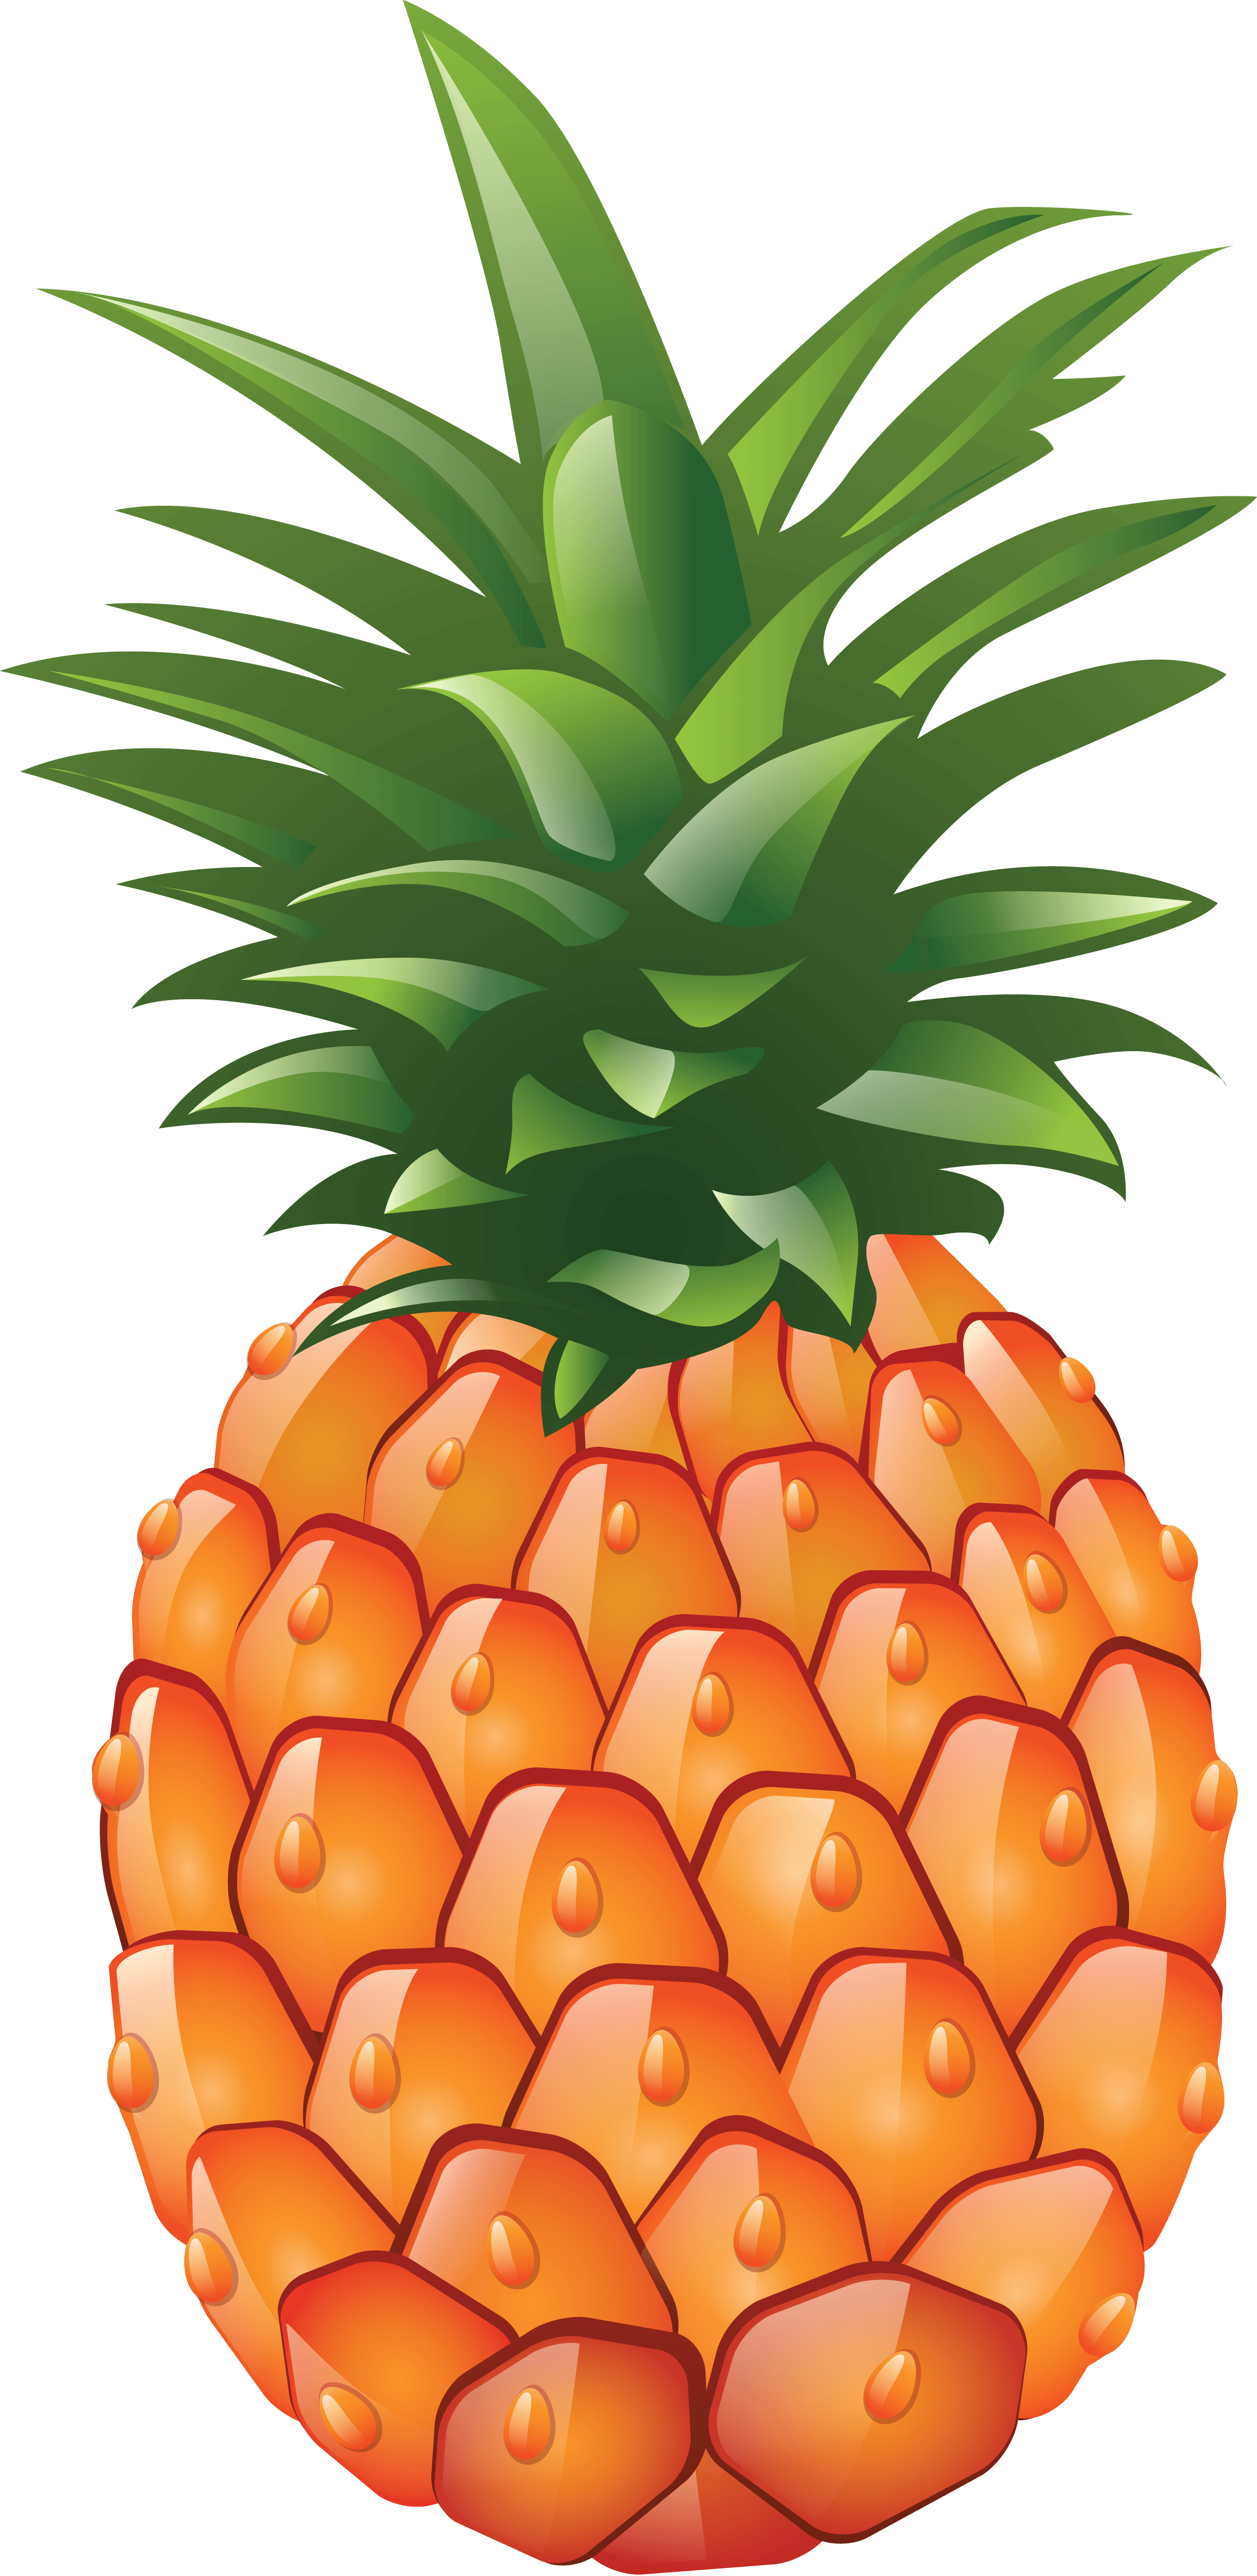 Pineapple PNG Images Transparent Free Download